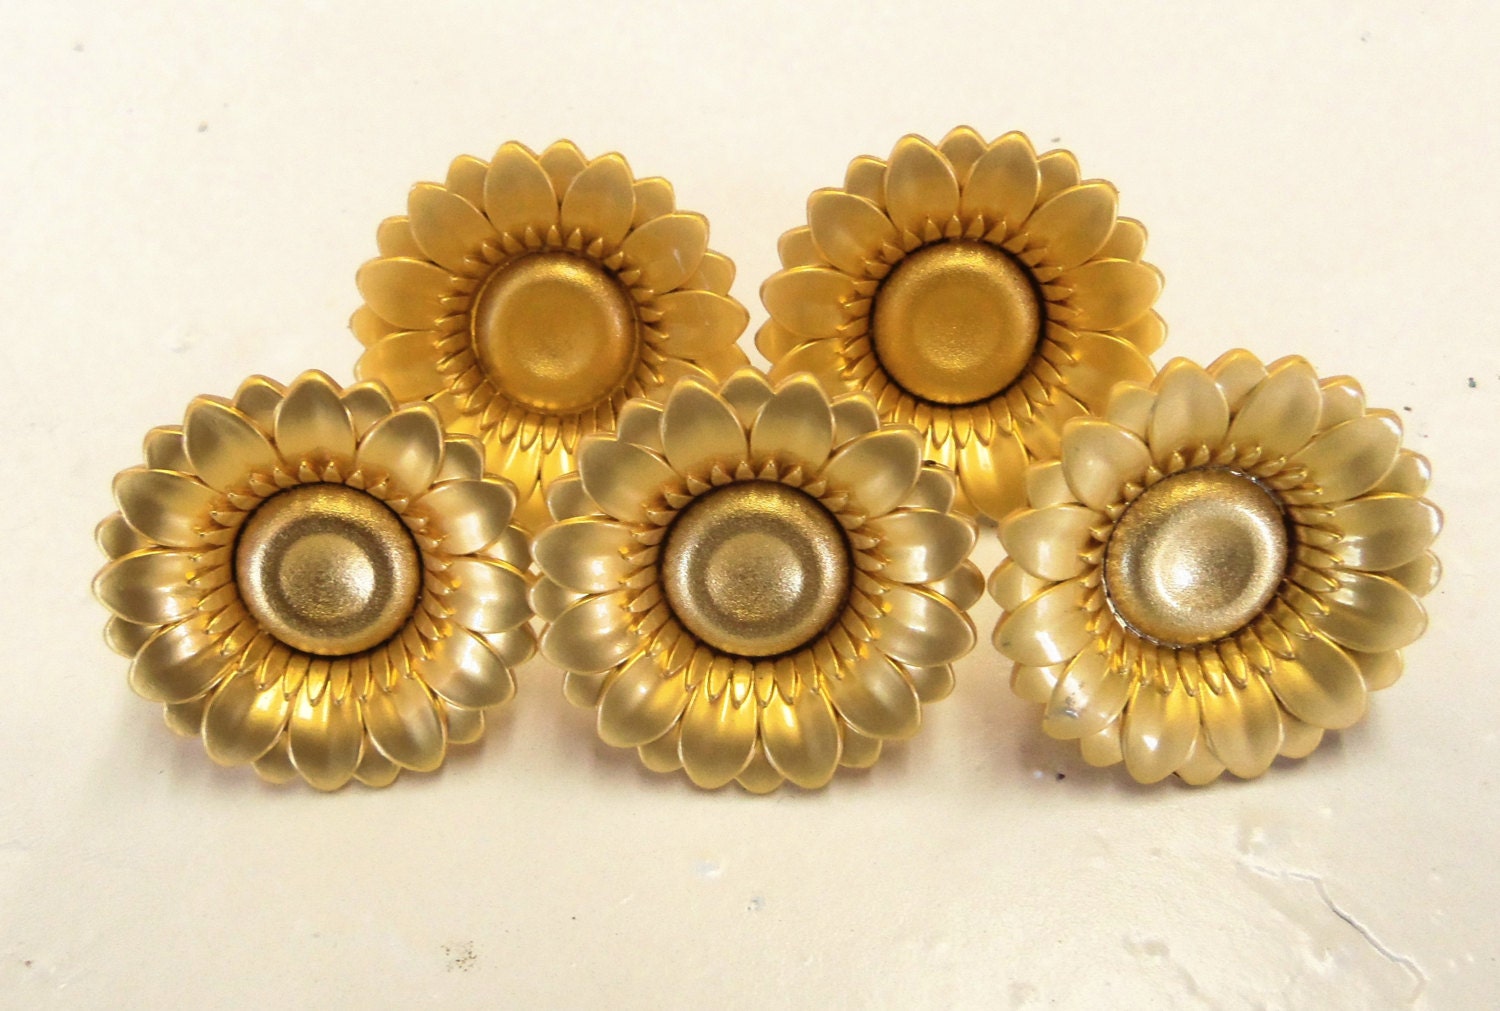 5 Sunflower Daisy Flower Knobs Drawer Pulls 13/8" Also Available in